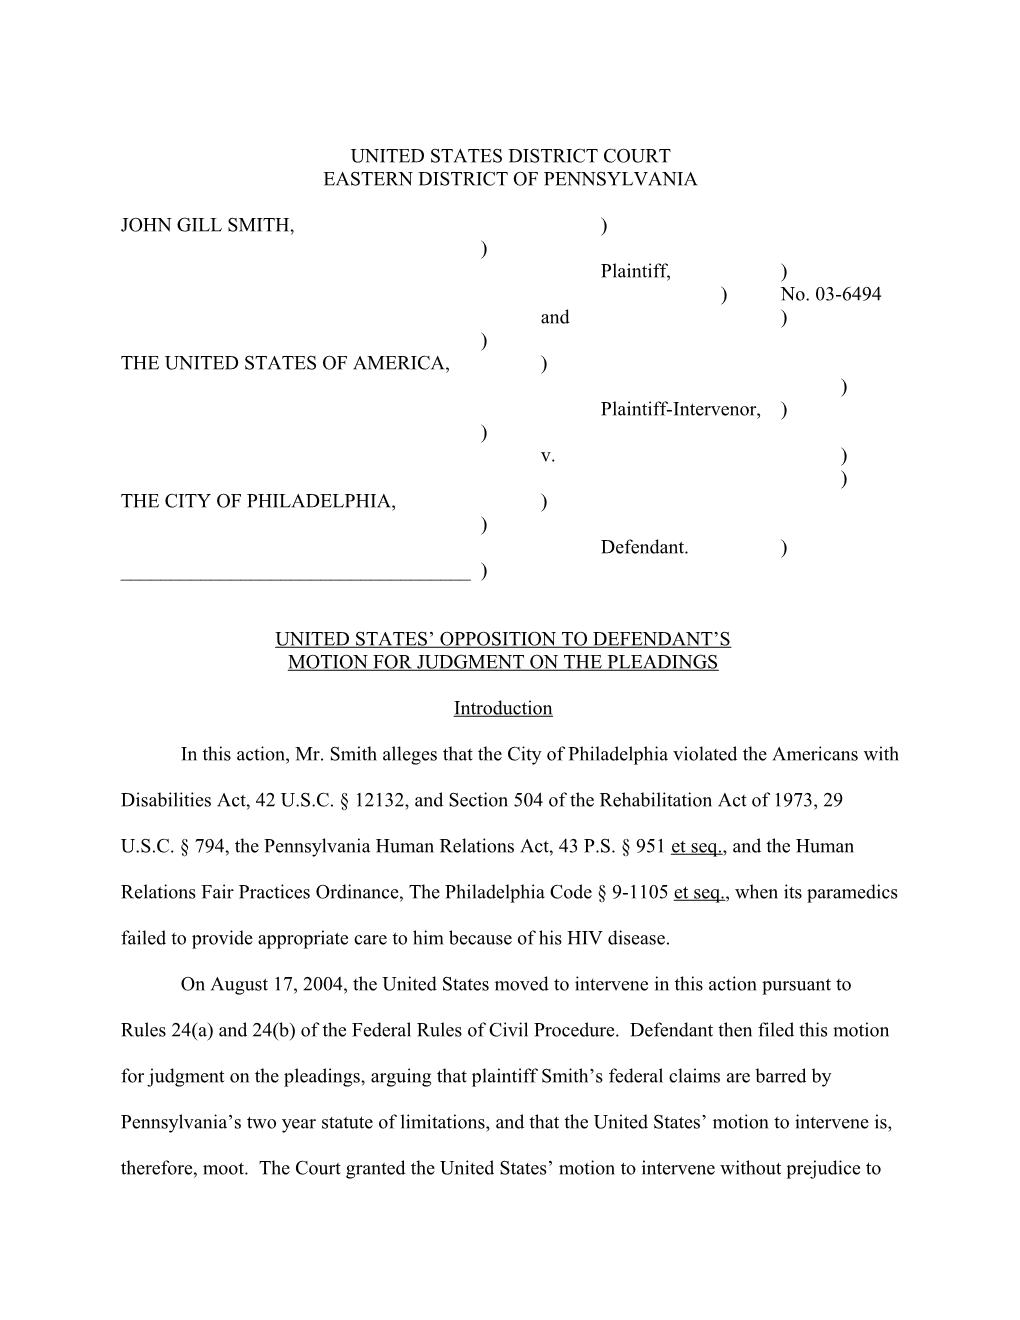 John Gill Smith and the United States of America V. the City of Philadelphia